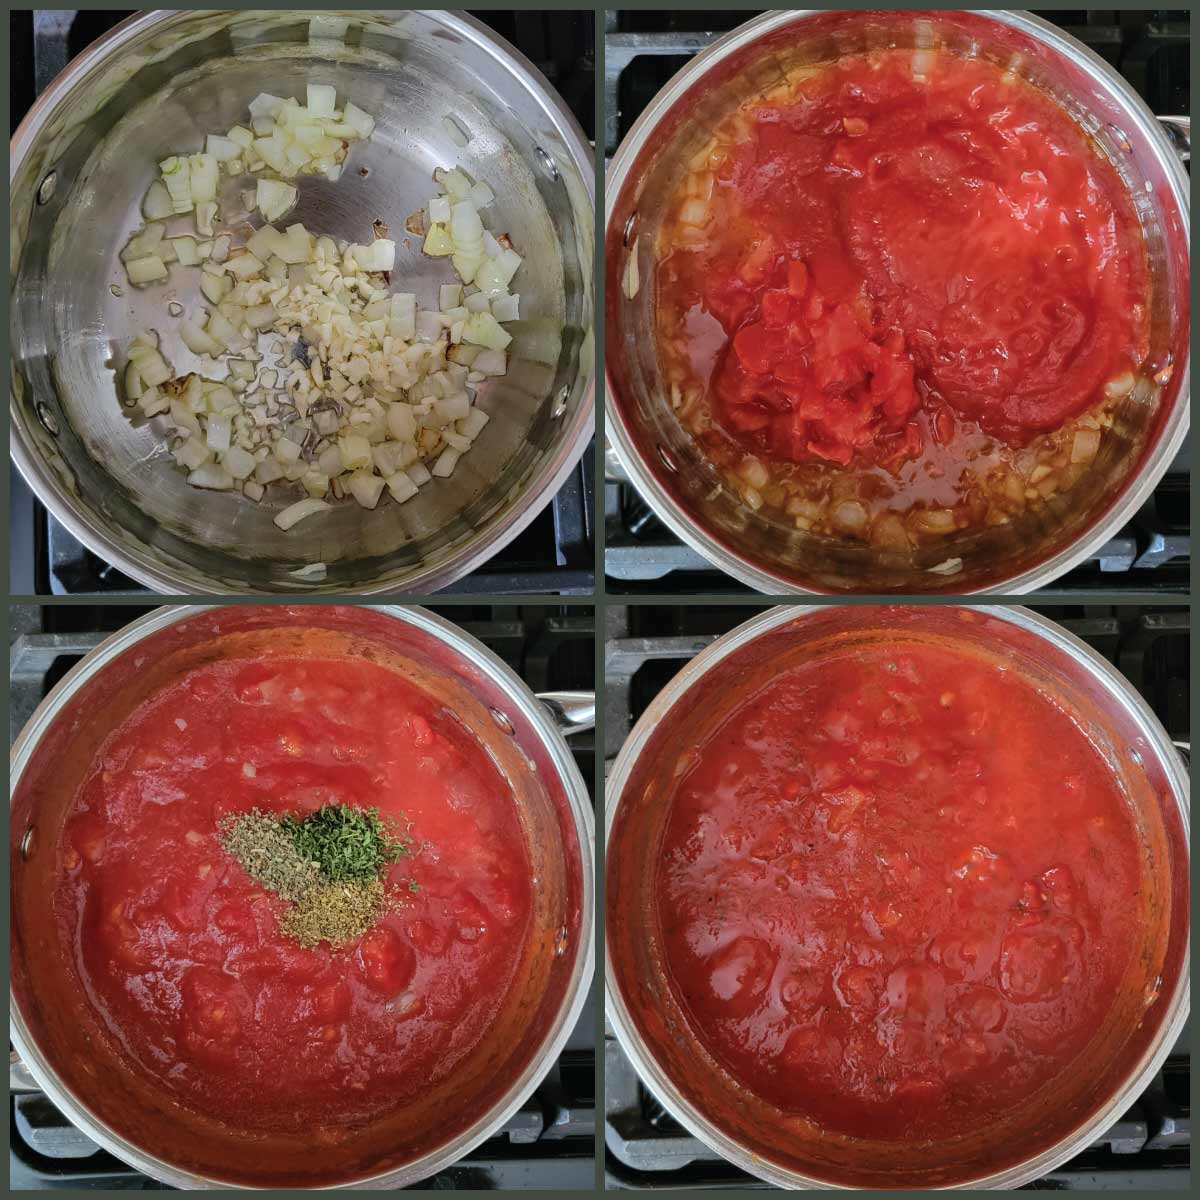 Steps for making the sauce - sautéing onions, adding tomatoes, adding seasoning and simmering.